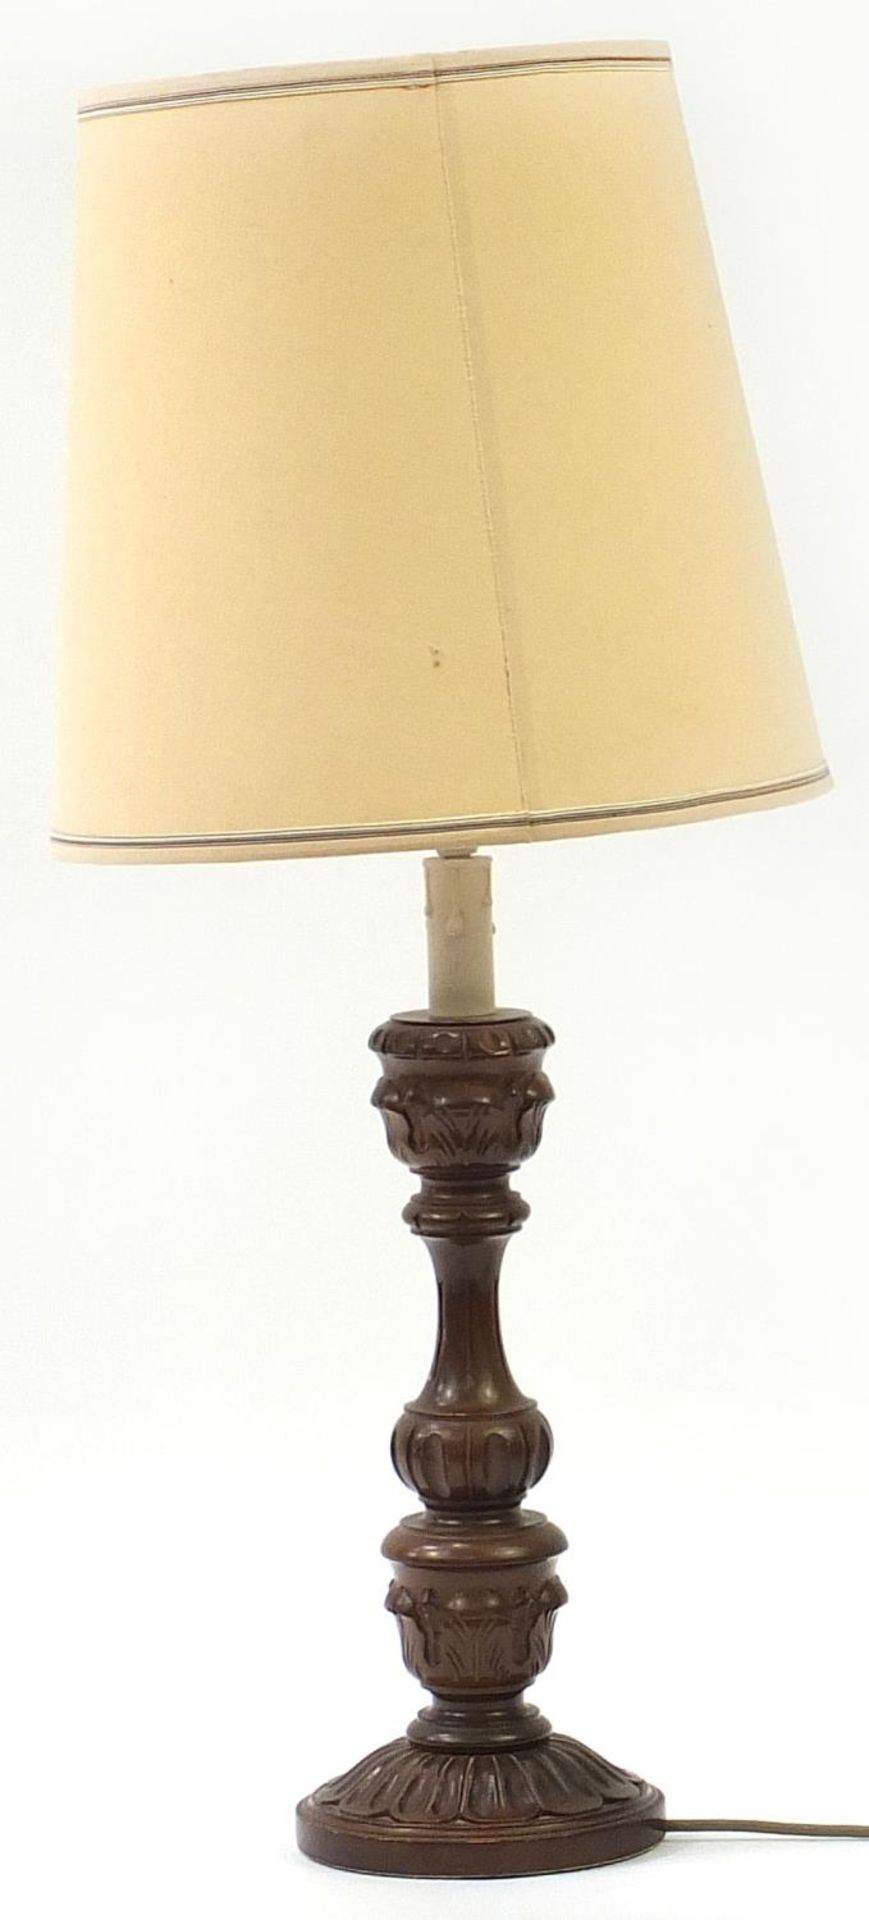 Carved mahogany table lamp with shade, 84cm high :For Further Condition Reports Please Visit Our